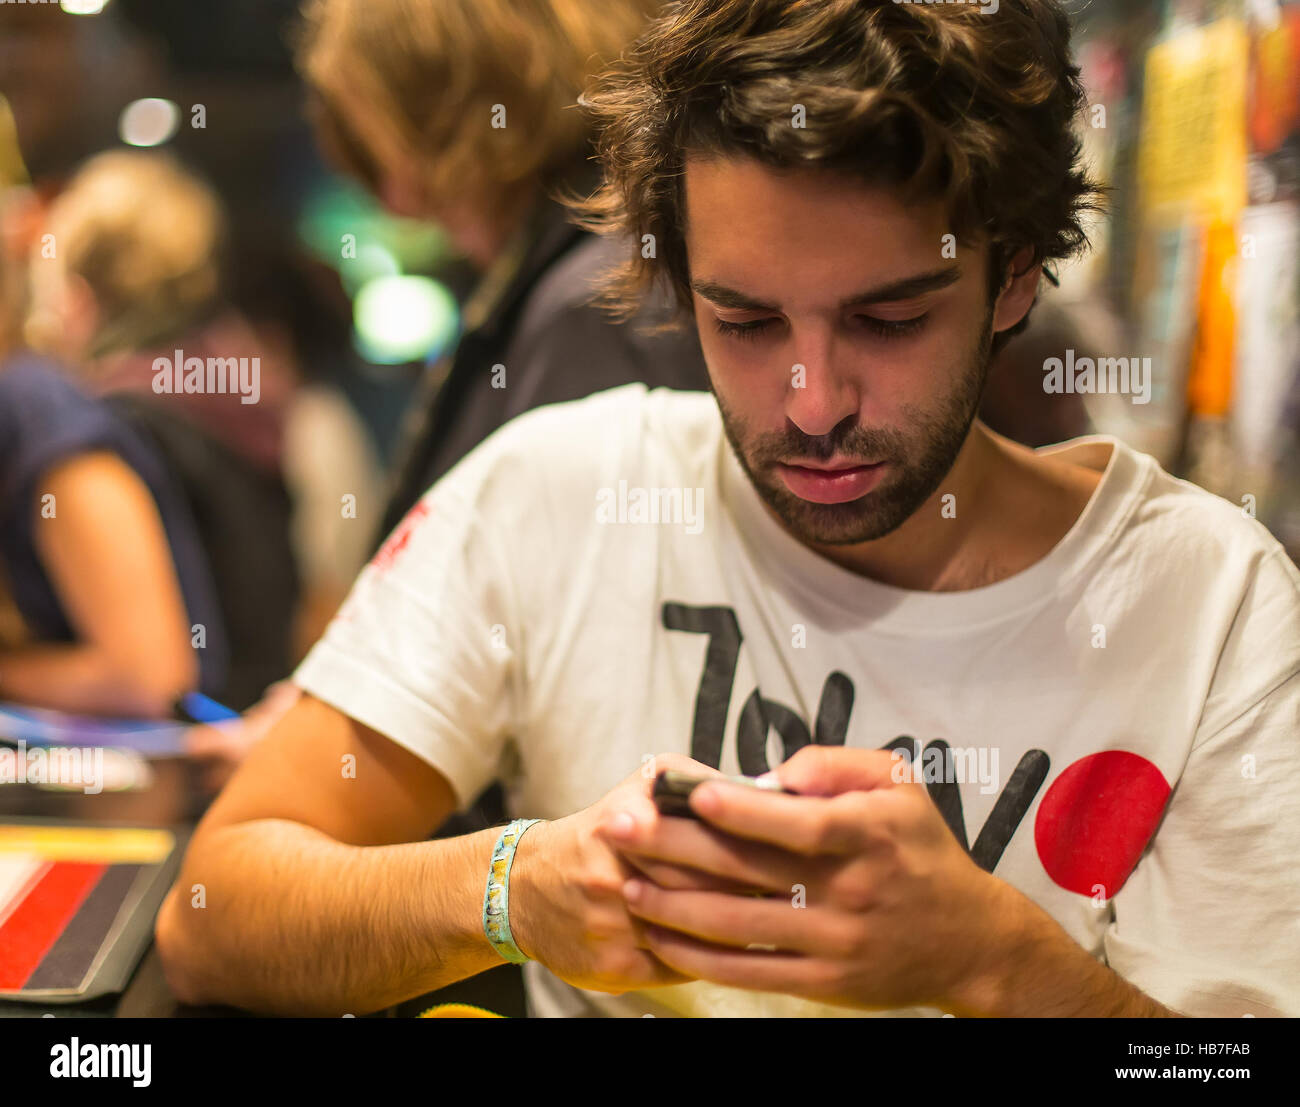 Young man surfing on the internet on his smart phone. Stock Photo